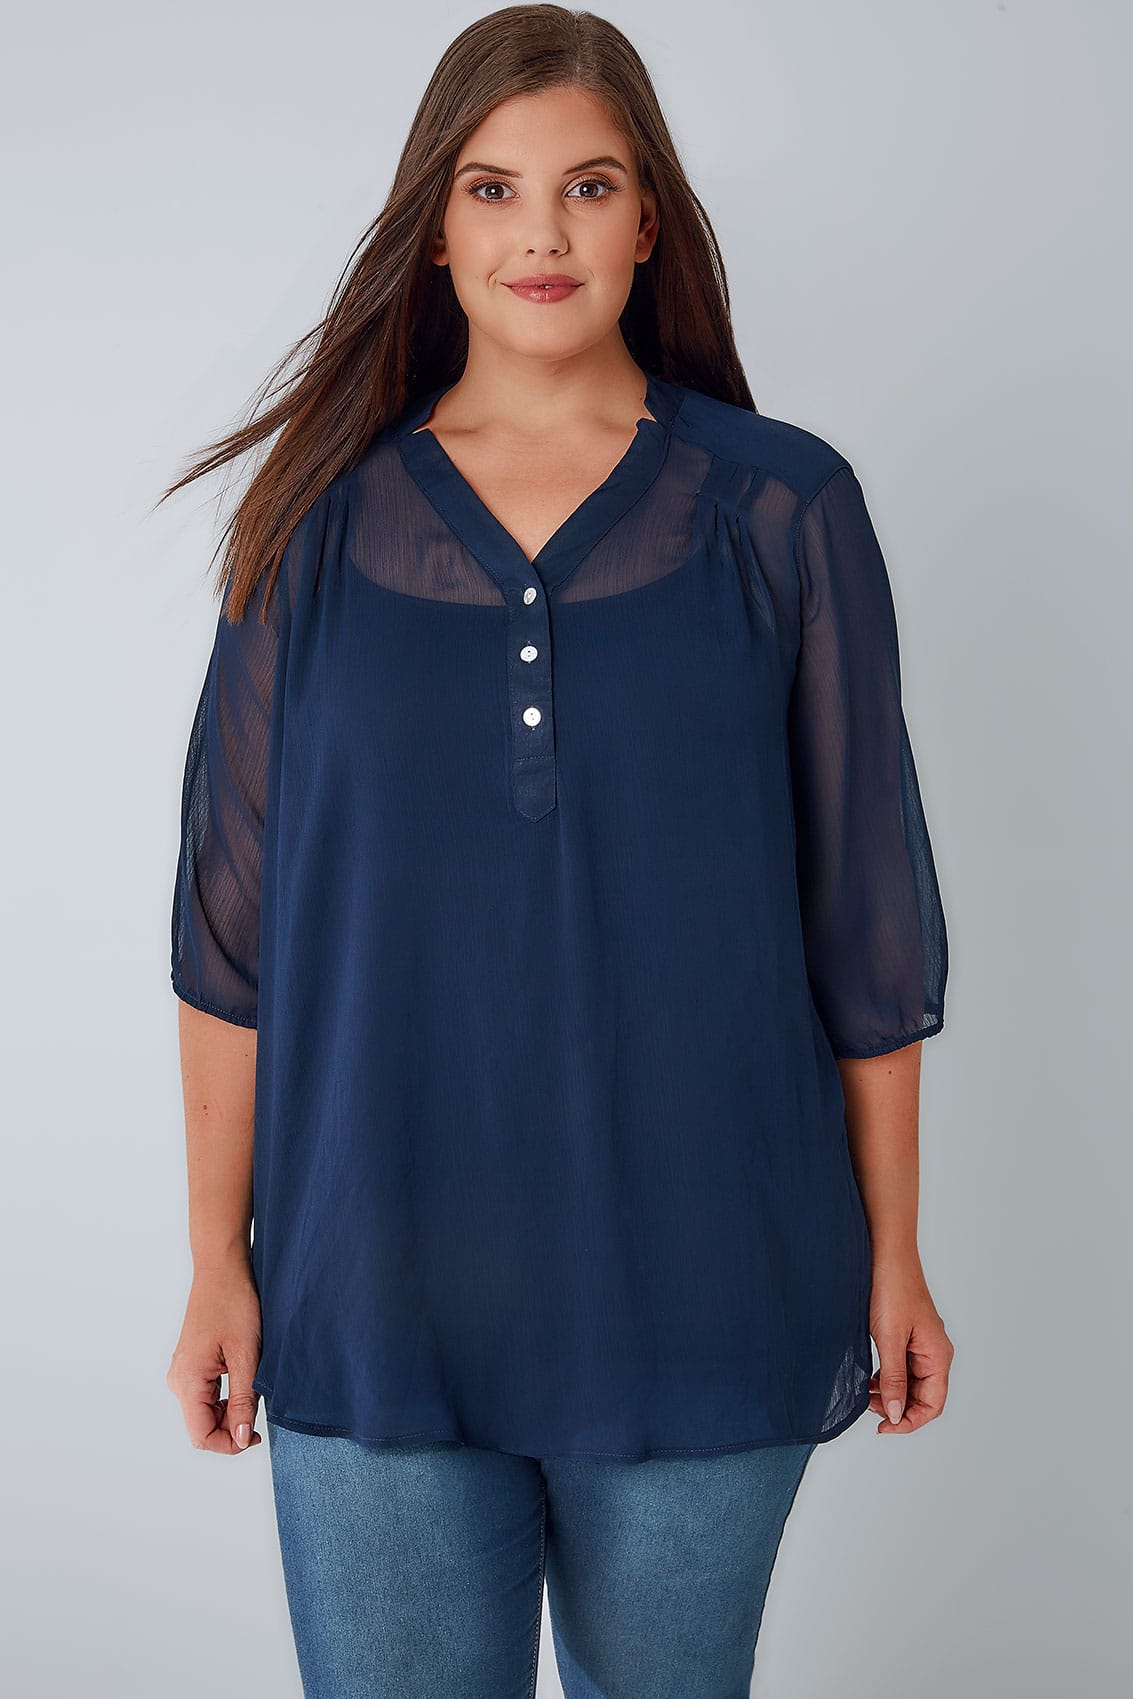 Navy Sheer Chiffon Button-Up Blouse With 3/4 Length Sleeves plus size ...